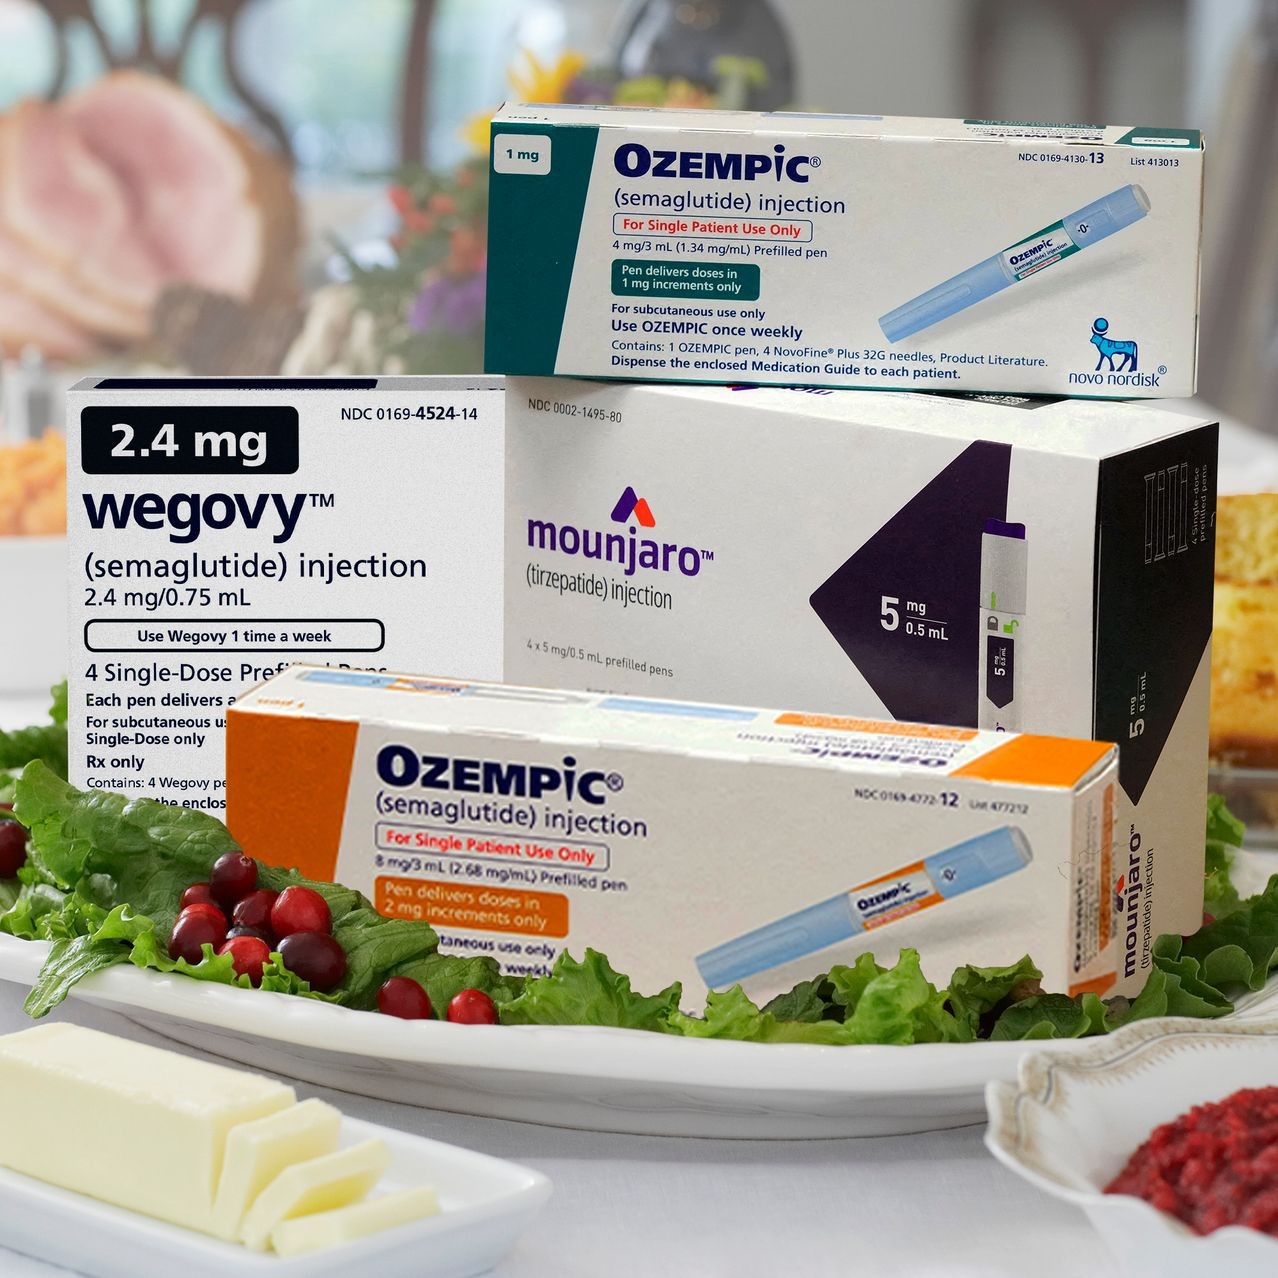 Whatsapp +61279120109 where to buy ozempic for weight loss,buy ozempic dubai-image